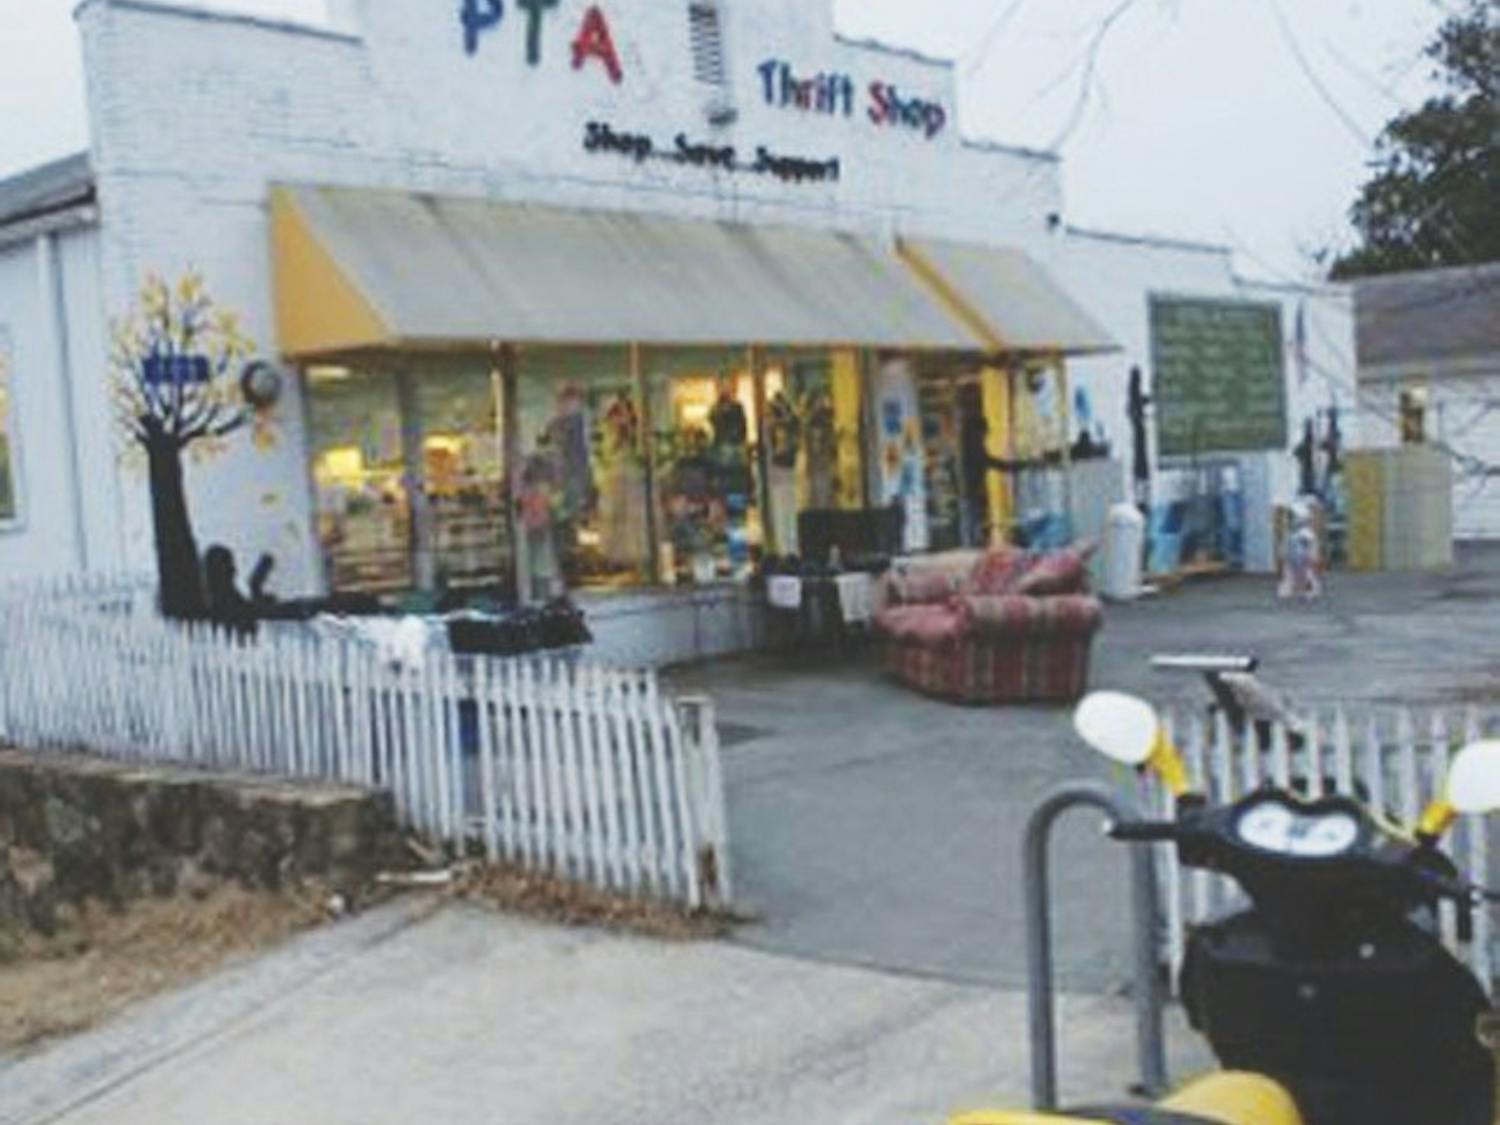 	Many students turn to PTA Thrift Shop in Carrboro when shopping for furniture for their houses or apartments. Proceeds benefit local schools.